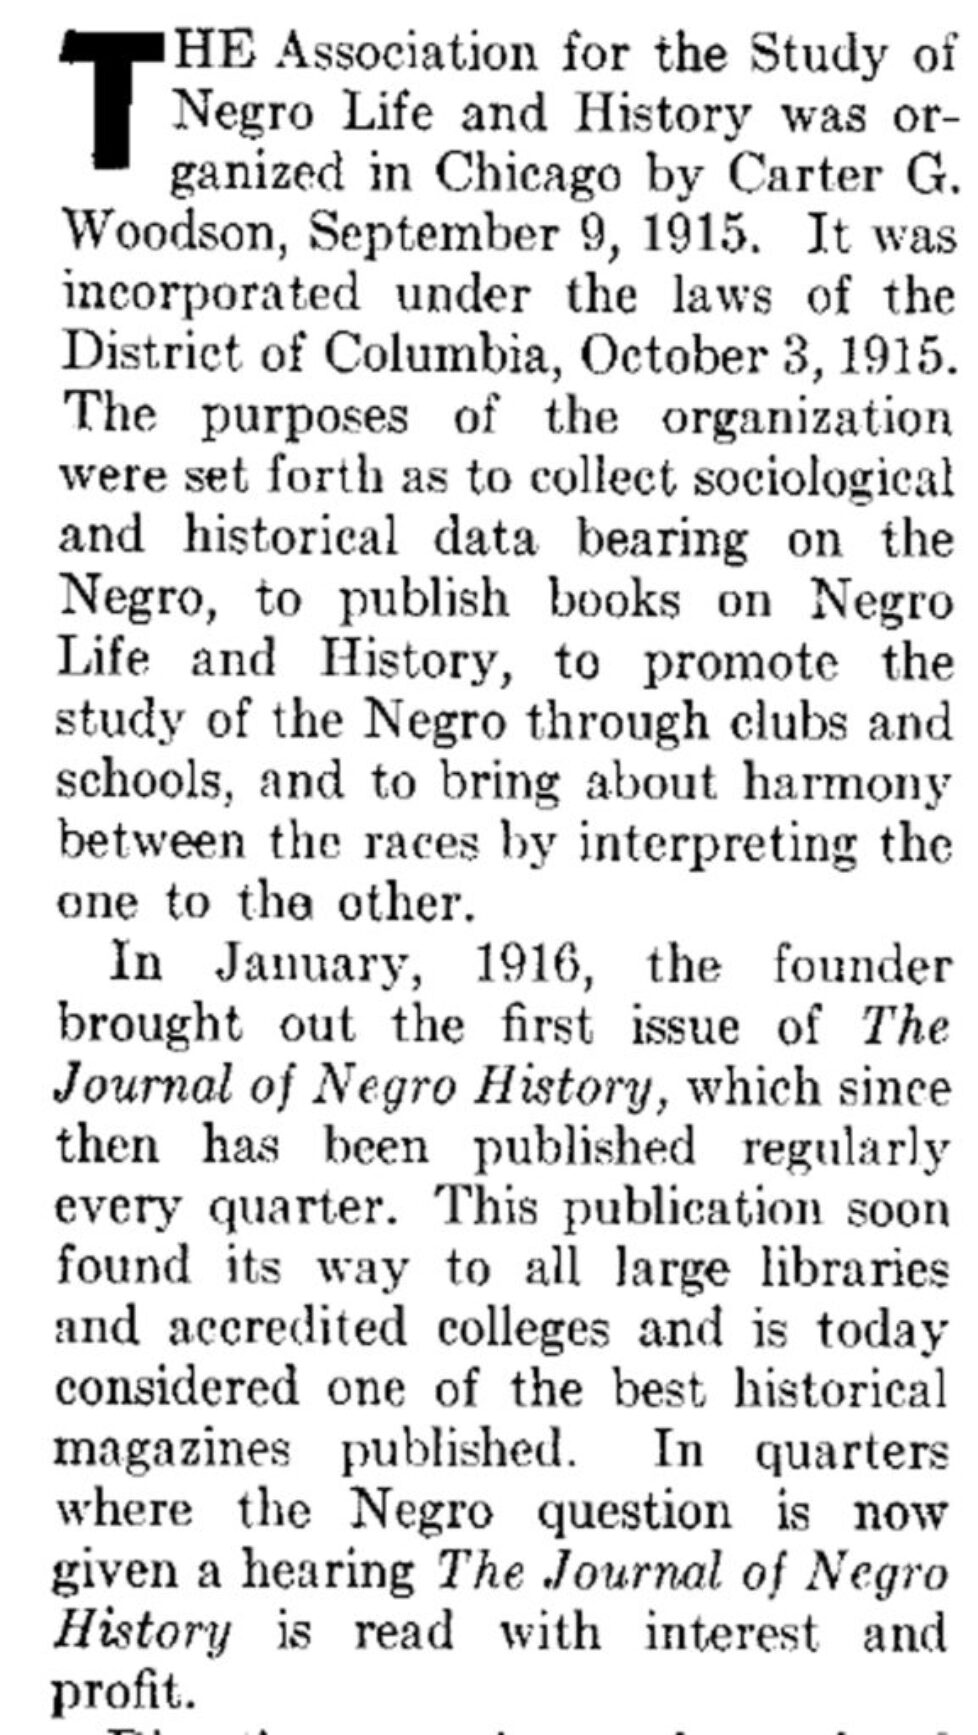 Publishing Record in ASNLH History 1938